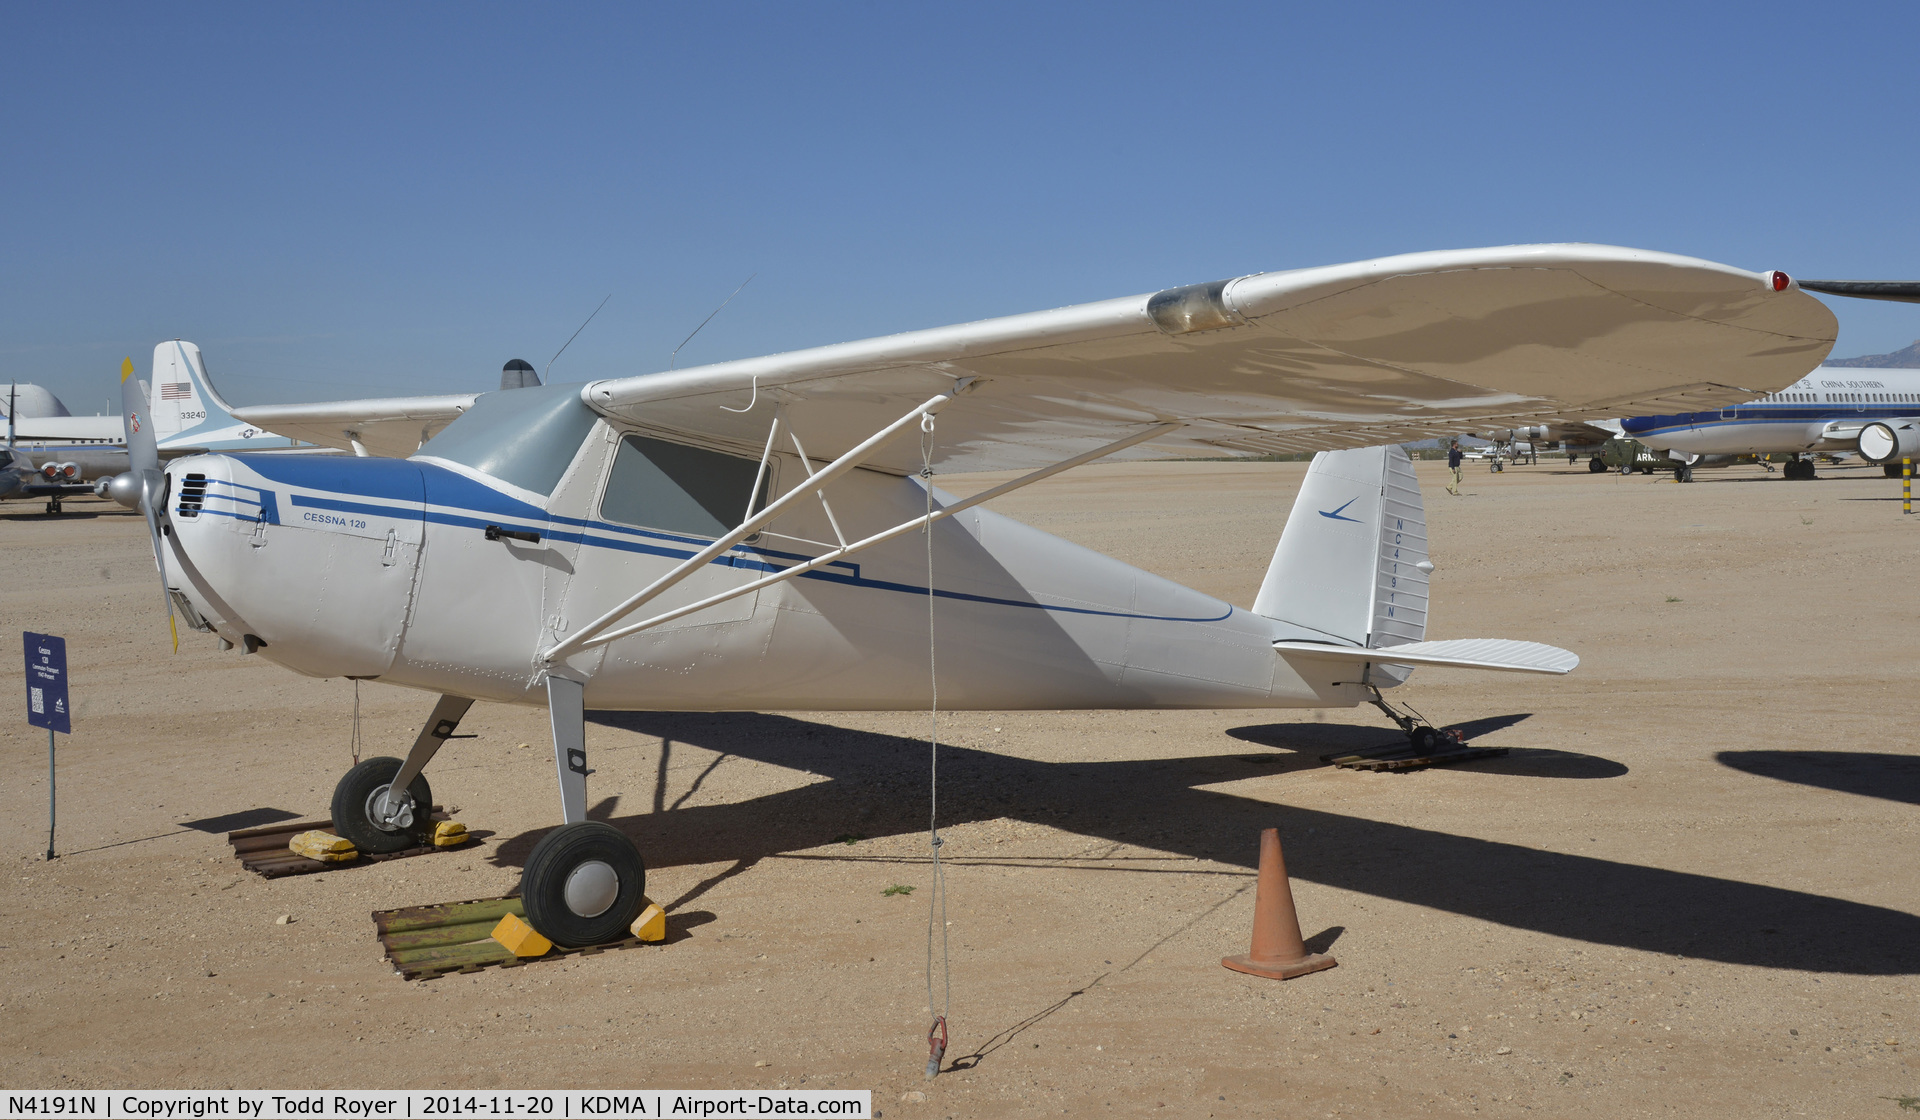 N4191N, 1947 Cessna 120 C/N 13662, On display at the Pima Air and Space Museum